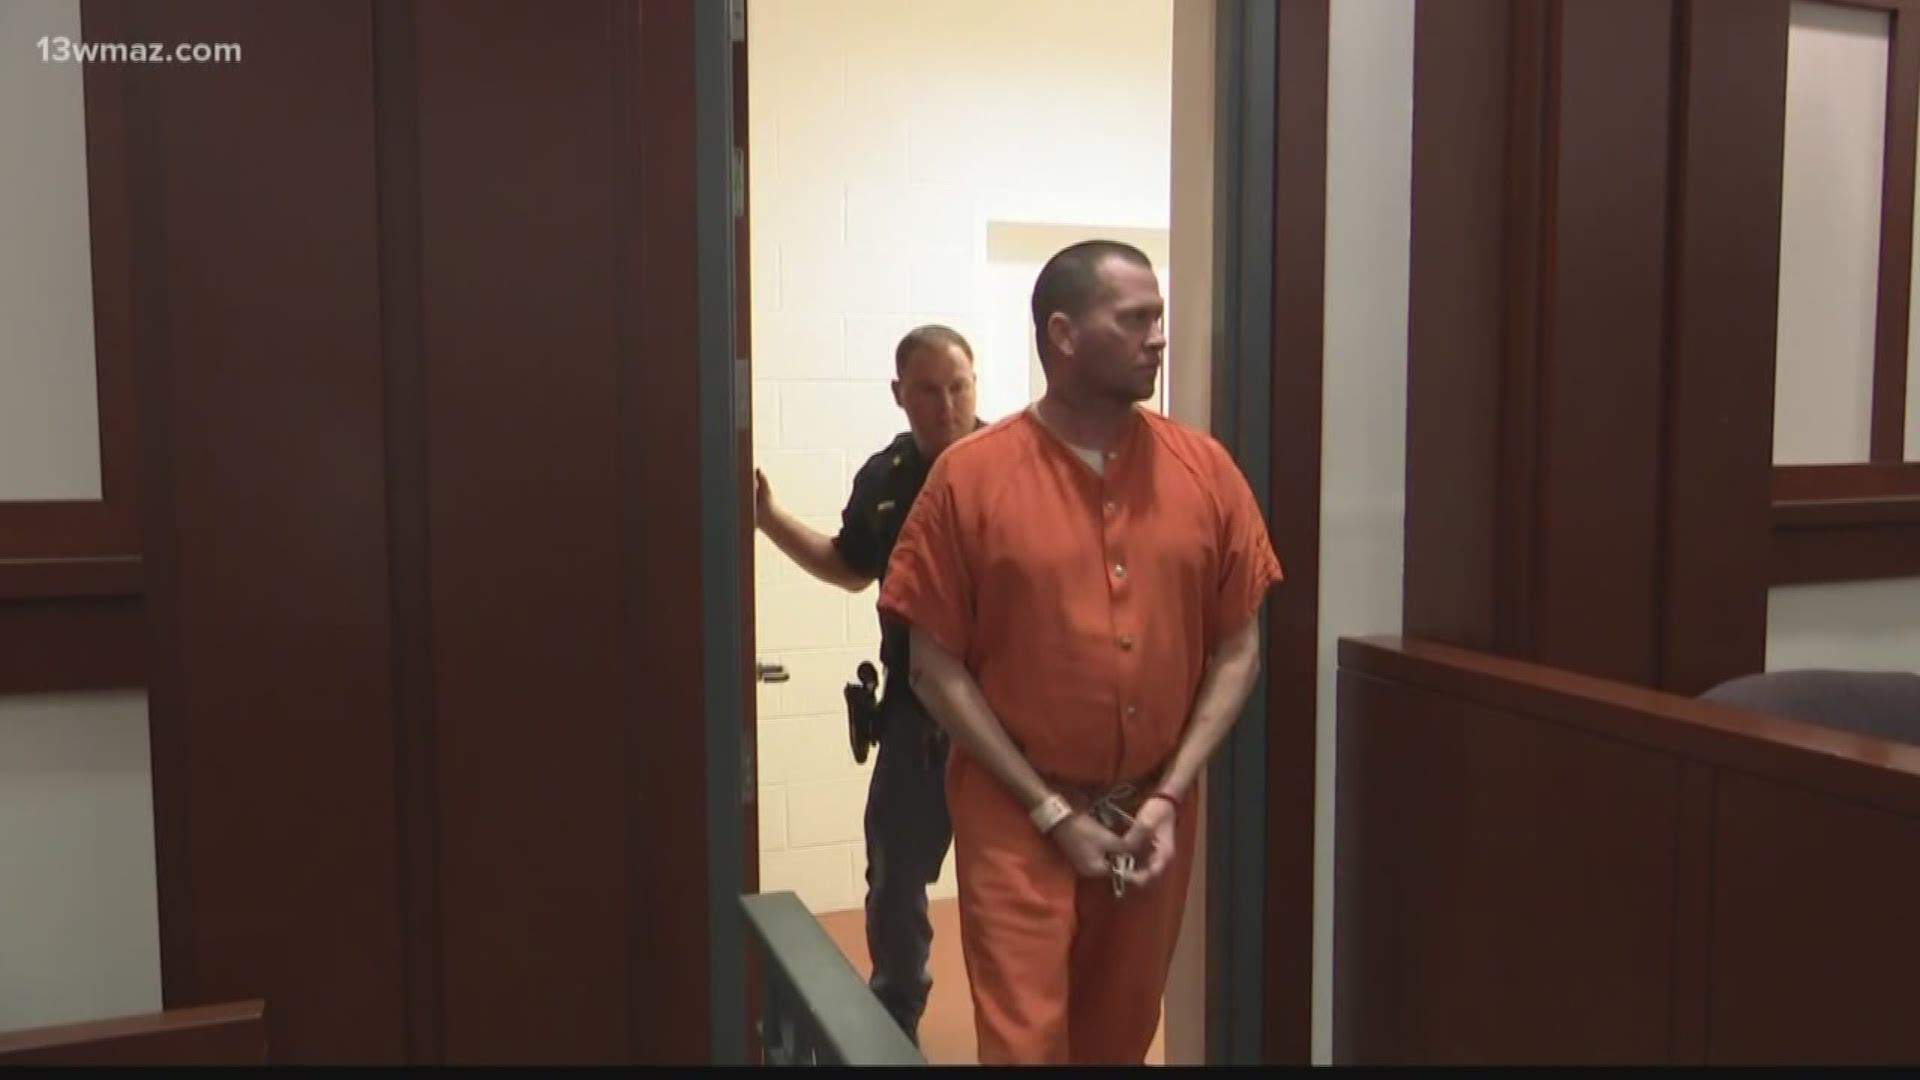 The man accused of injuring a Centerville Police officer in a shootout appeared in court Thursday for a plea hearing. As part of the plea agreement, several charges were dropped from the 16-count indictment against Perry Baggett.